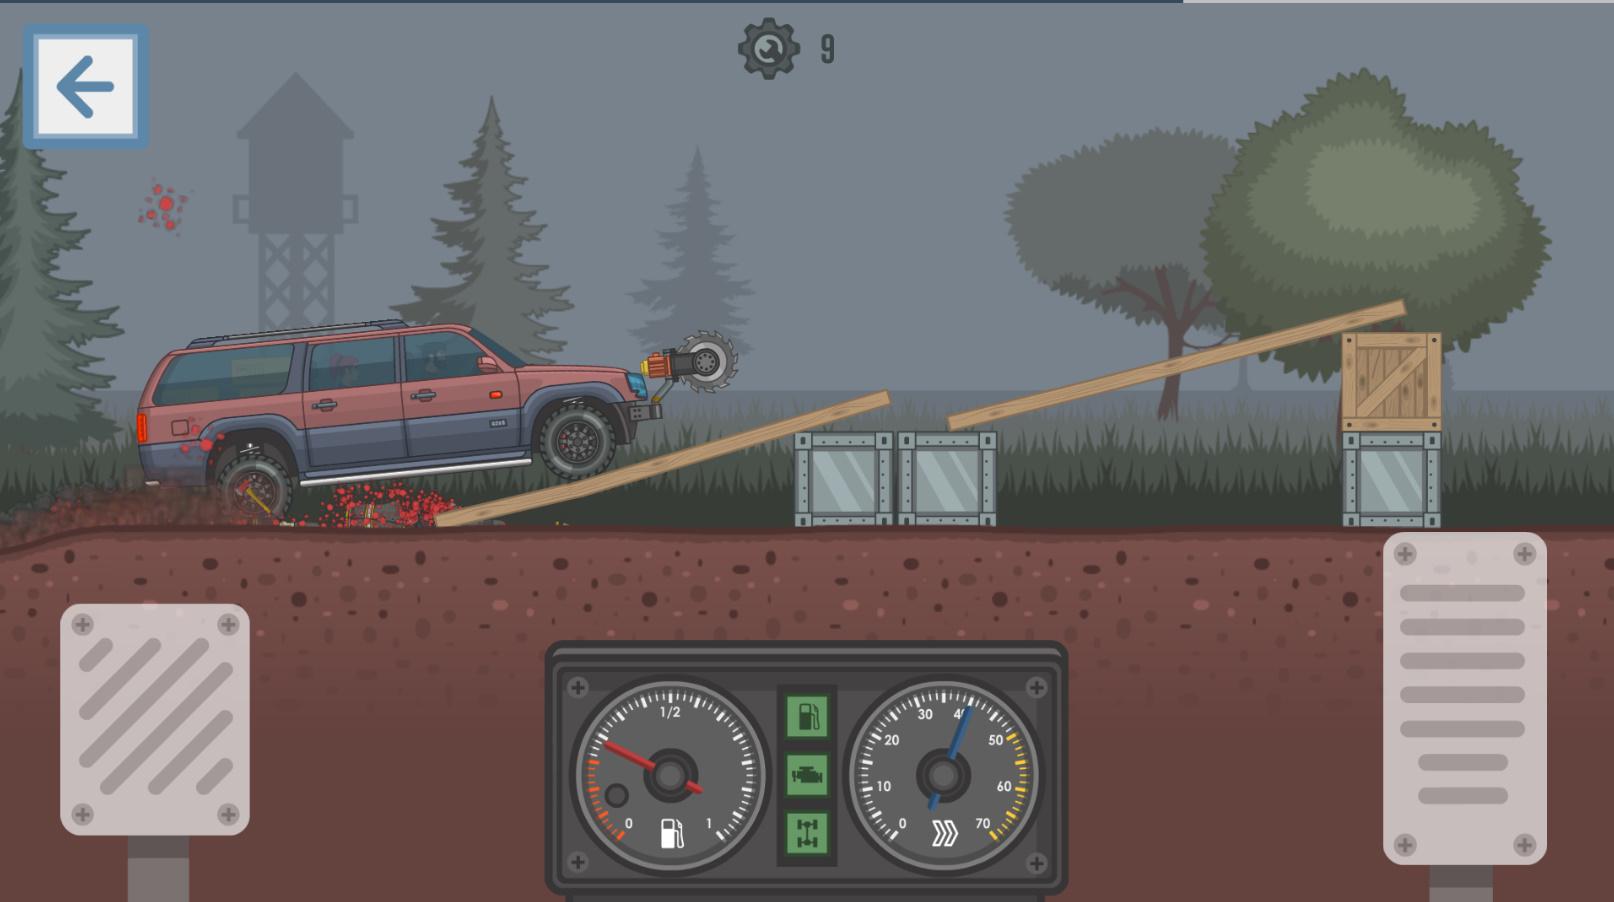 The Last Road - Inception for Android